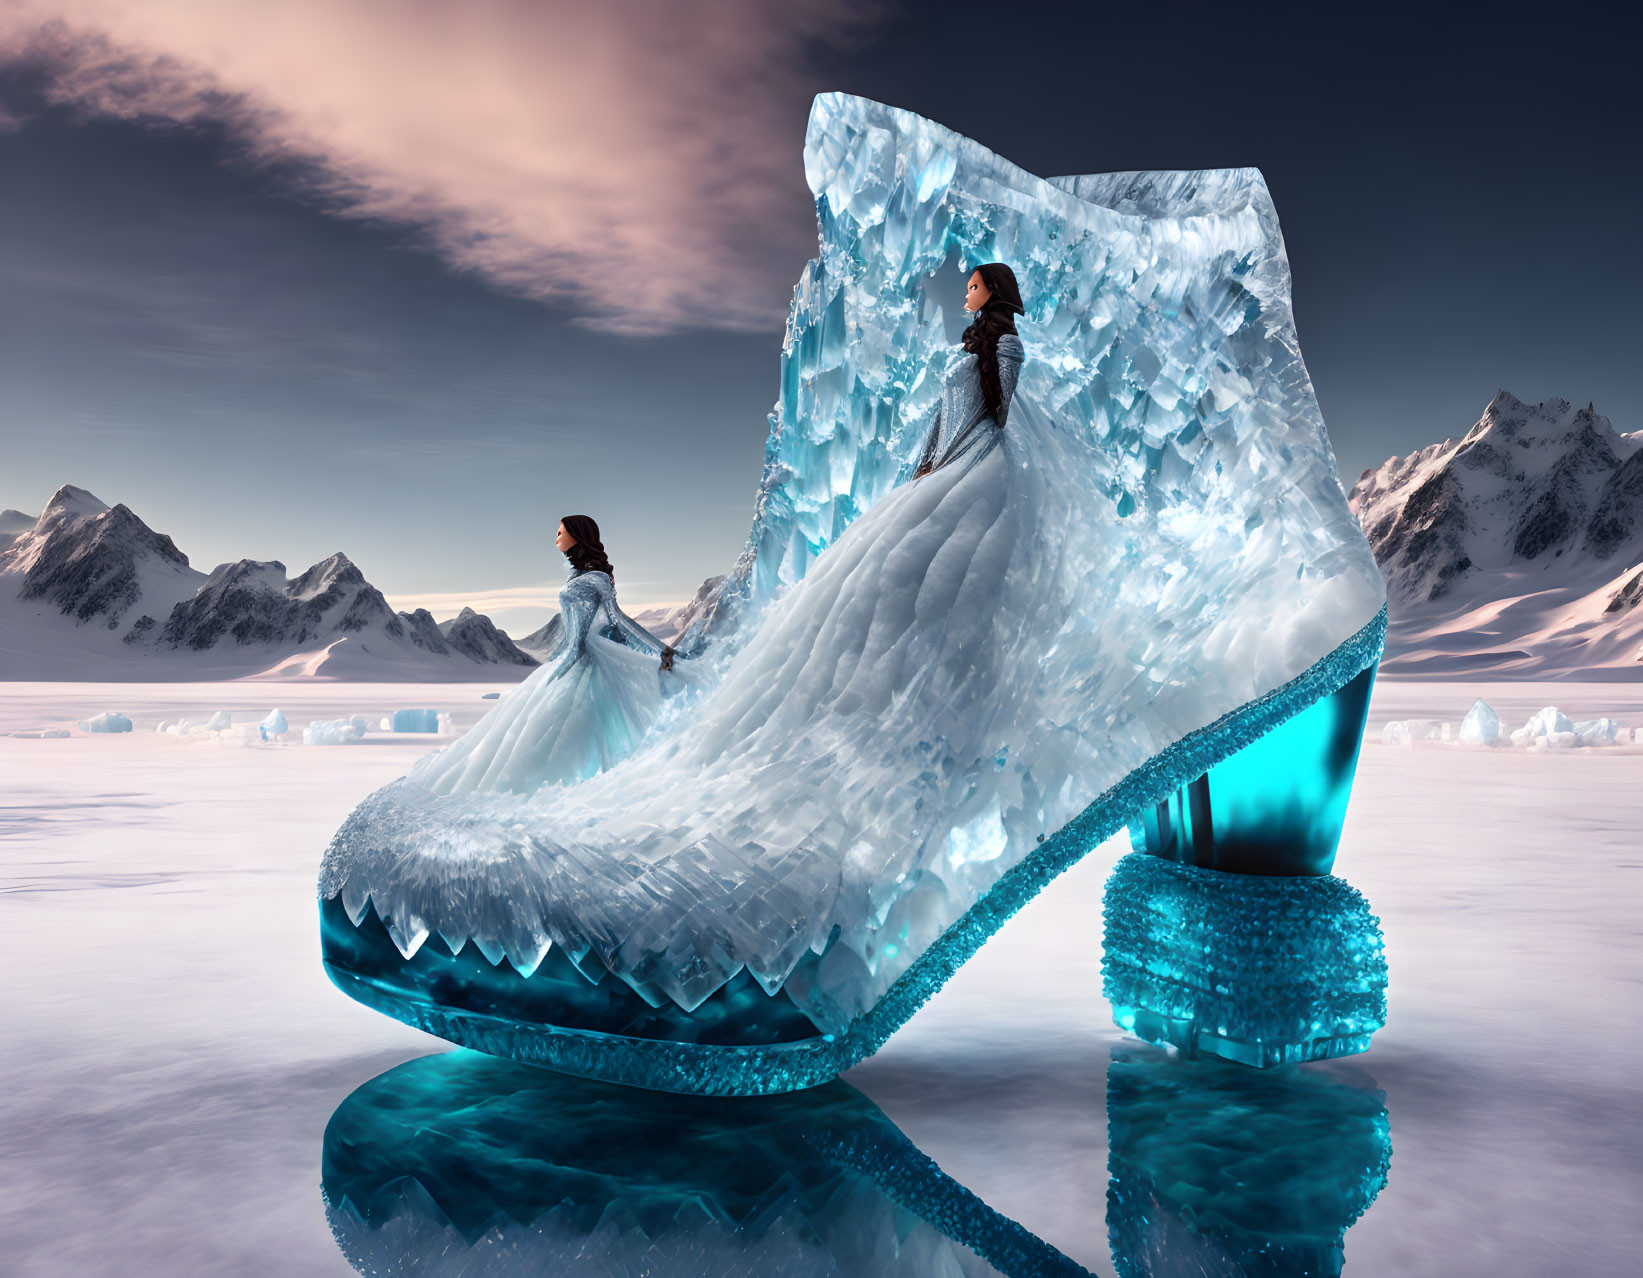 Iced shoes queen, nonsense happens in dreams...